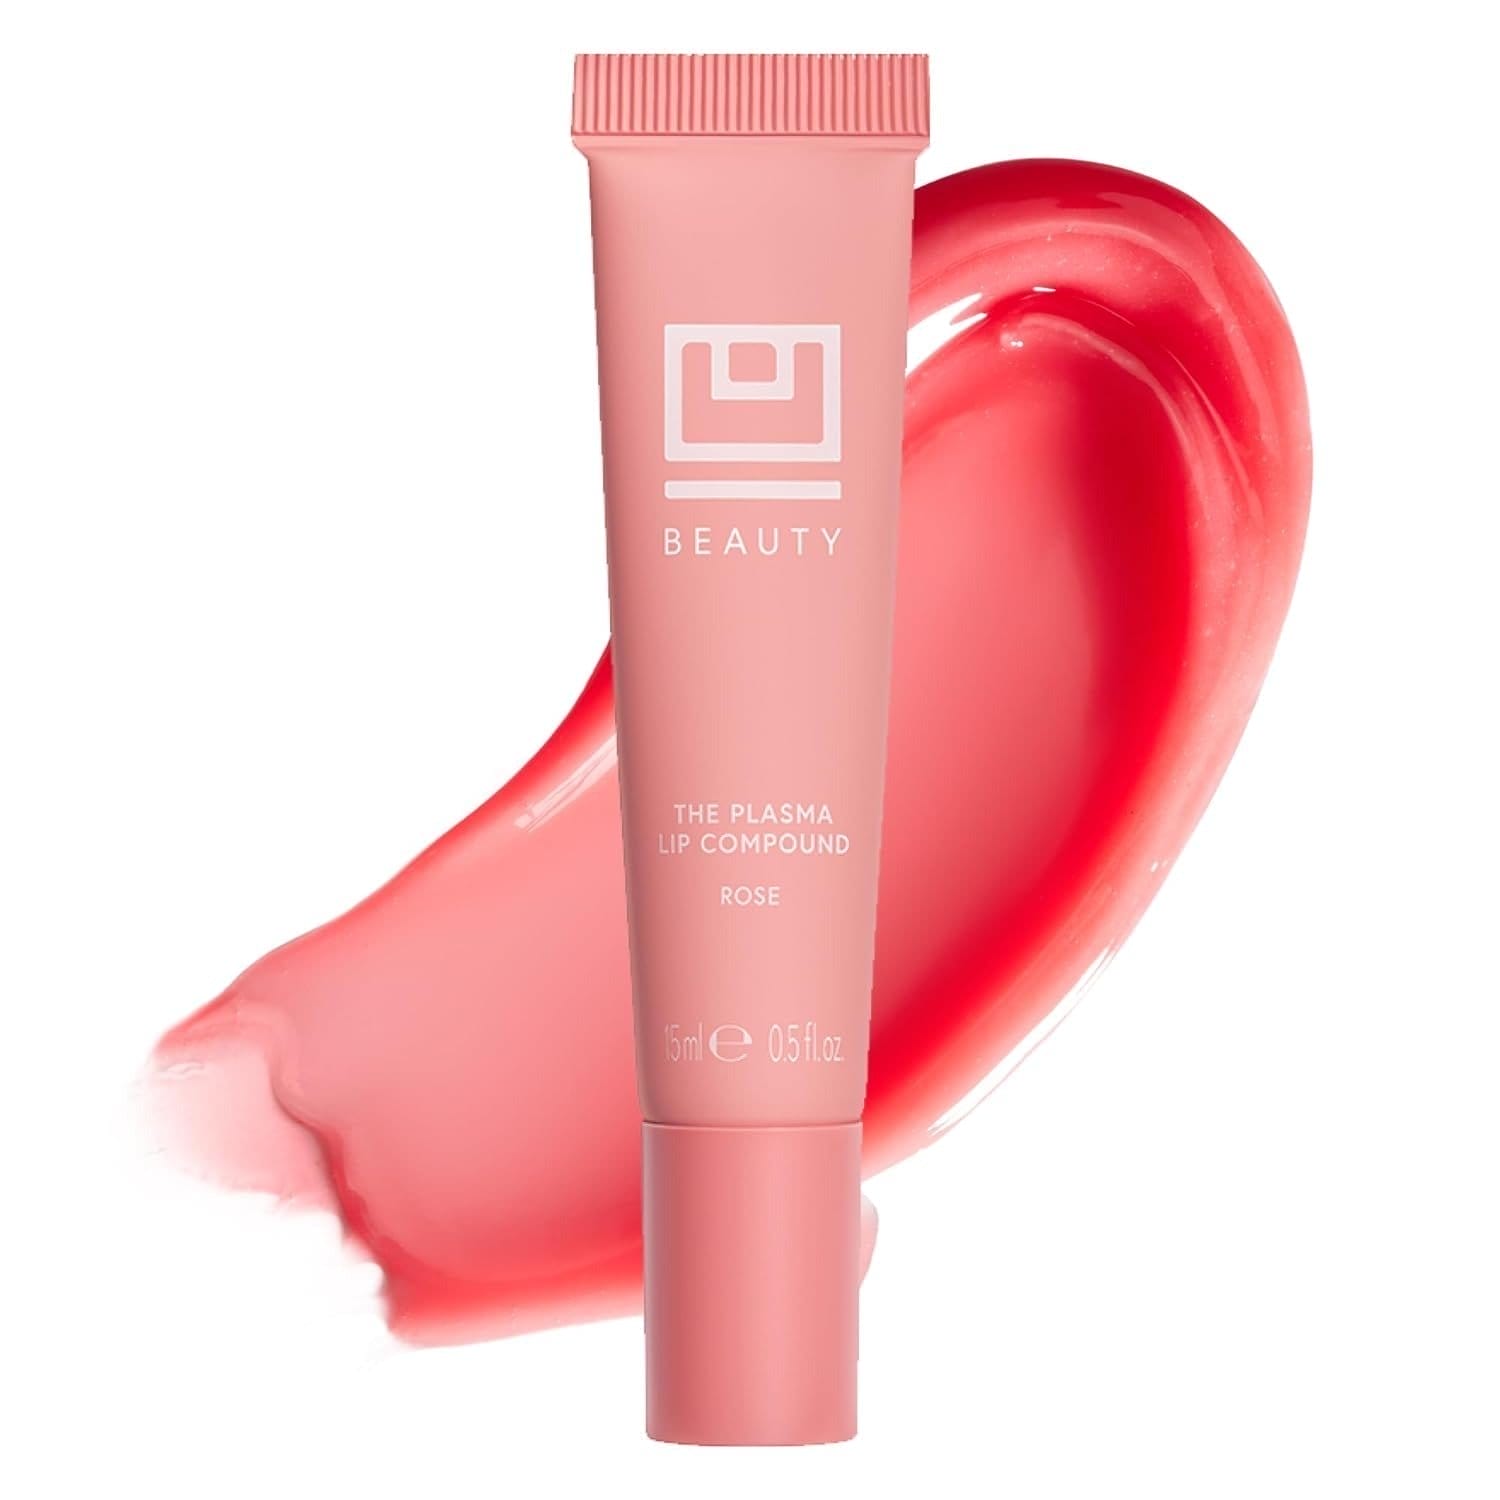 U Beauty's The Plasma Lip Compound Is 'Quiet Luxury' in a Tube